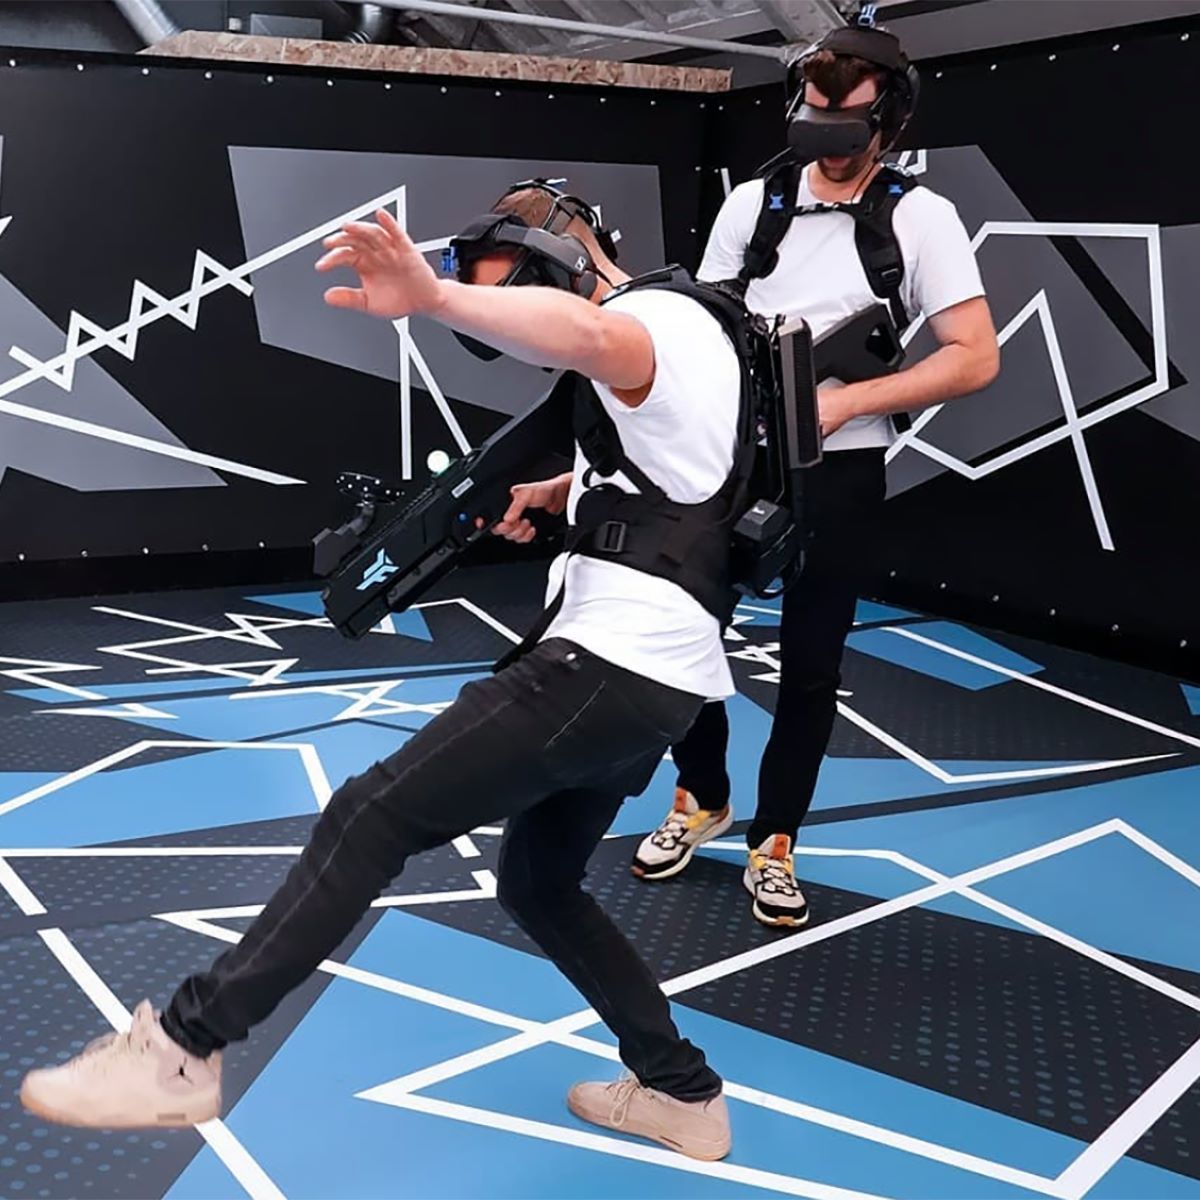 The free-roam virtual reality experience allows participants “the freedom to explore,”